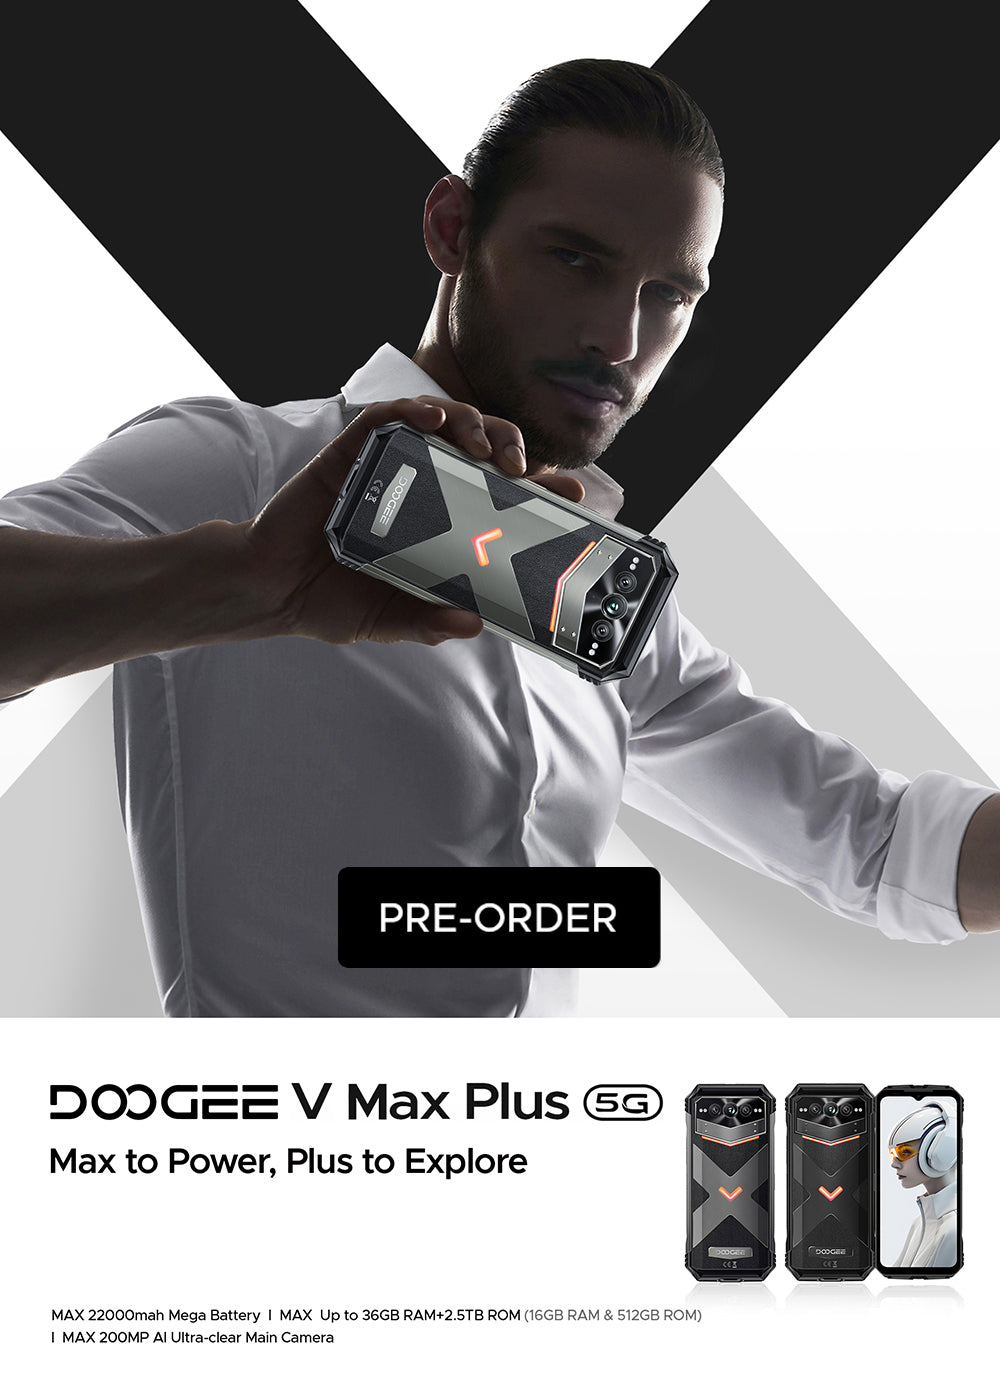 DOOGEE V Max Plus Coming Soon